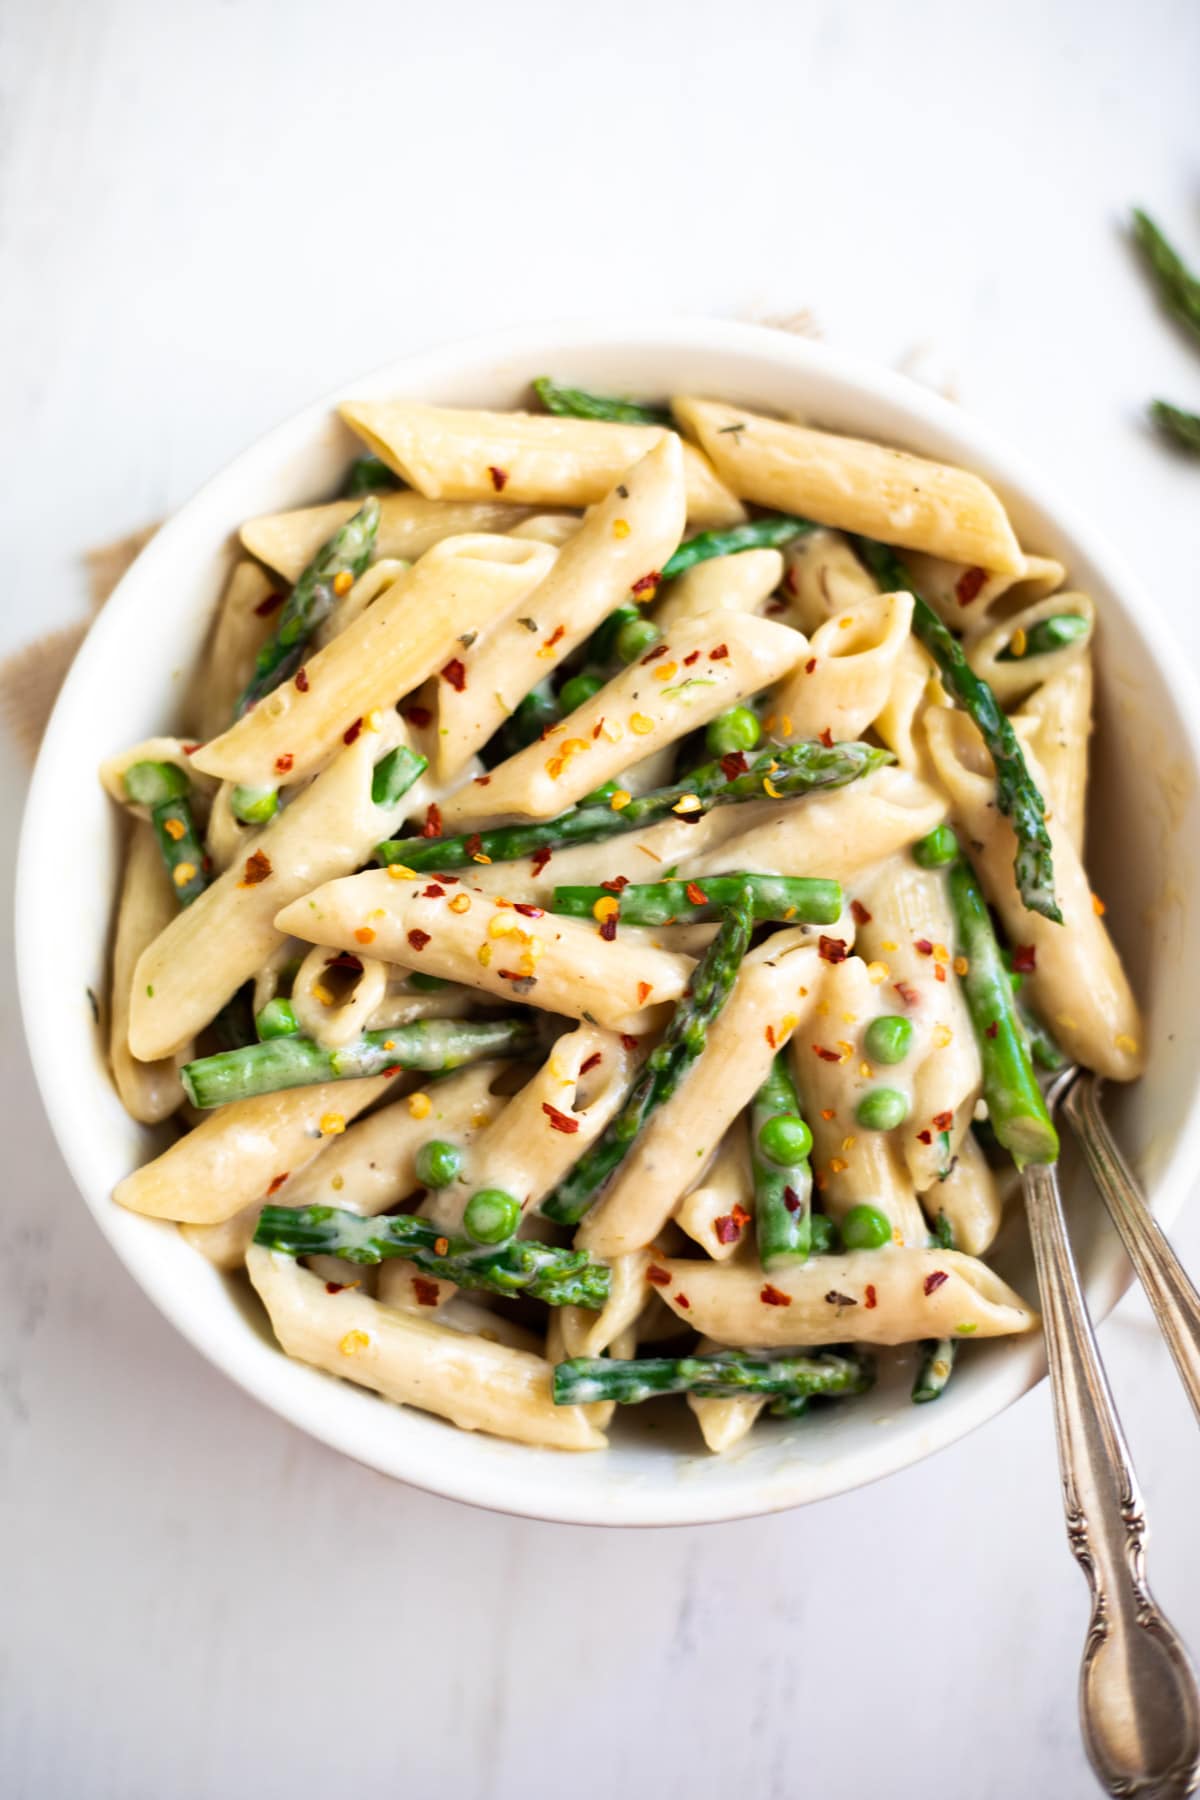 Creamy Asparagus pasta in a white bowl garnished with red chili flakes